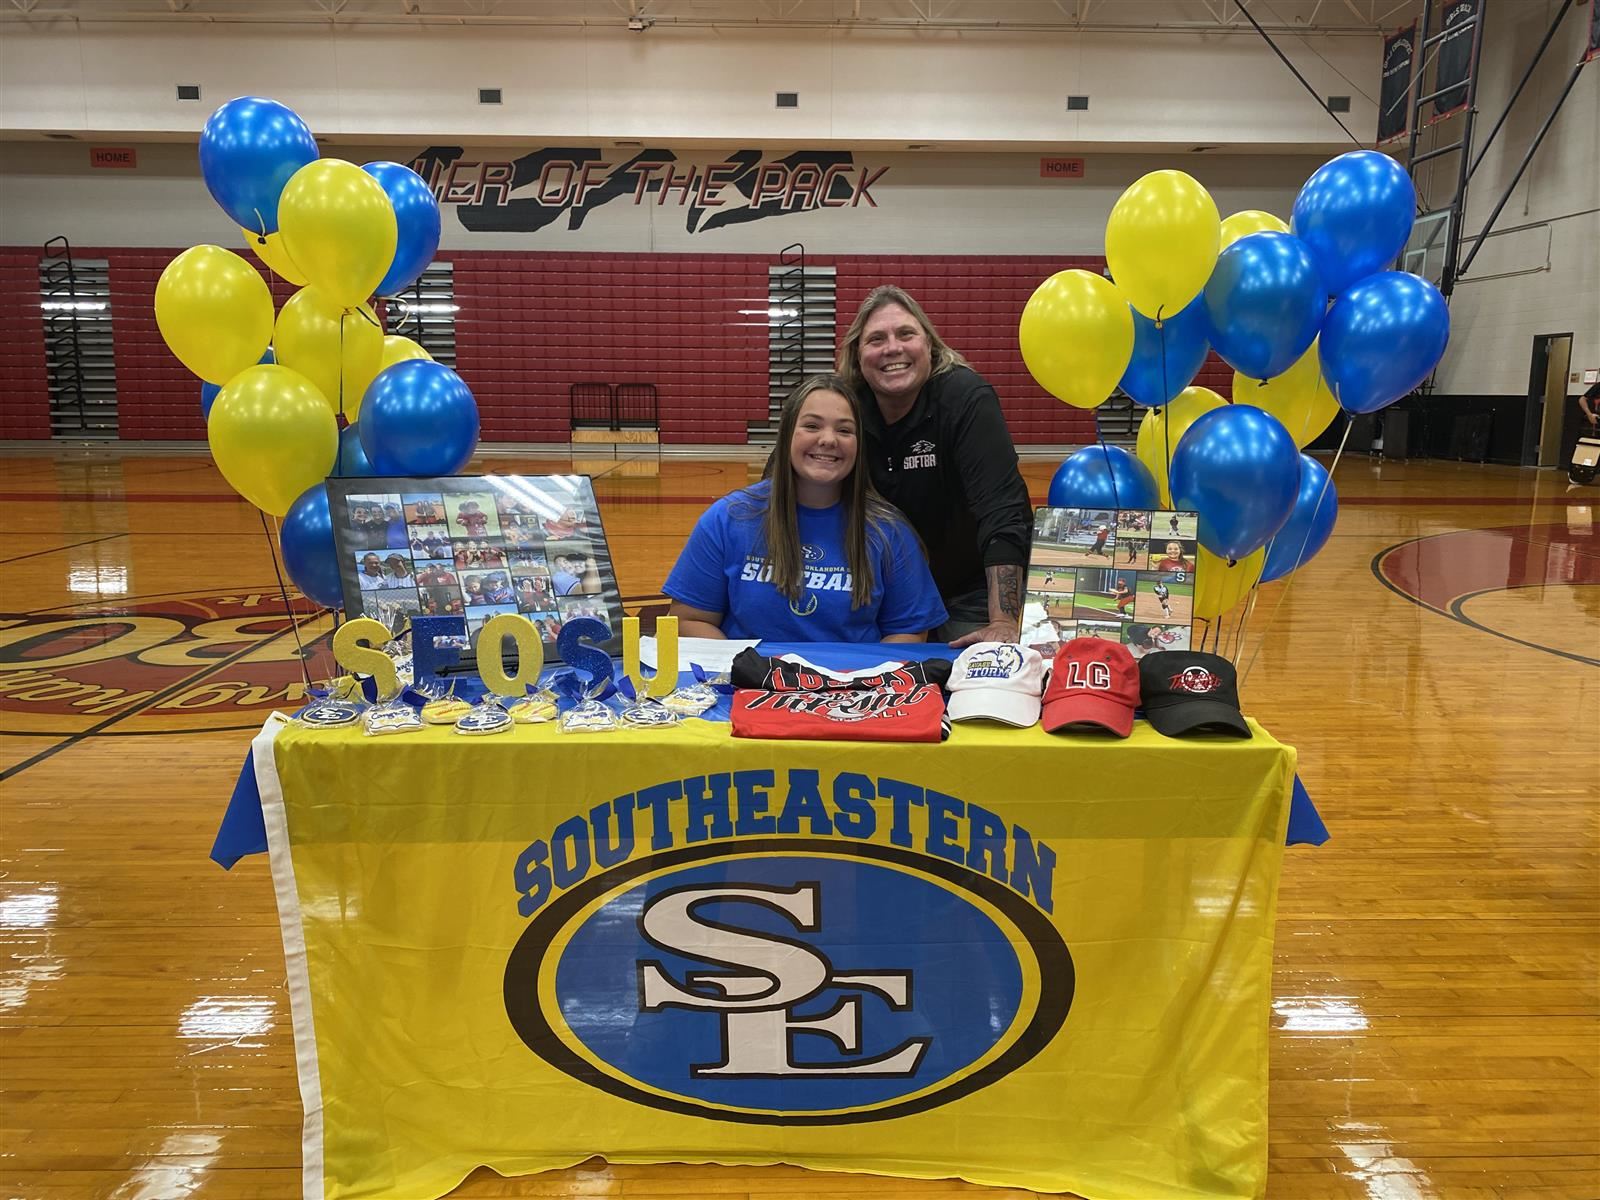 Langham Creek senior Emily Simmons, seated, signed a letter of intent to Southeastern Oklahoma State University.